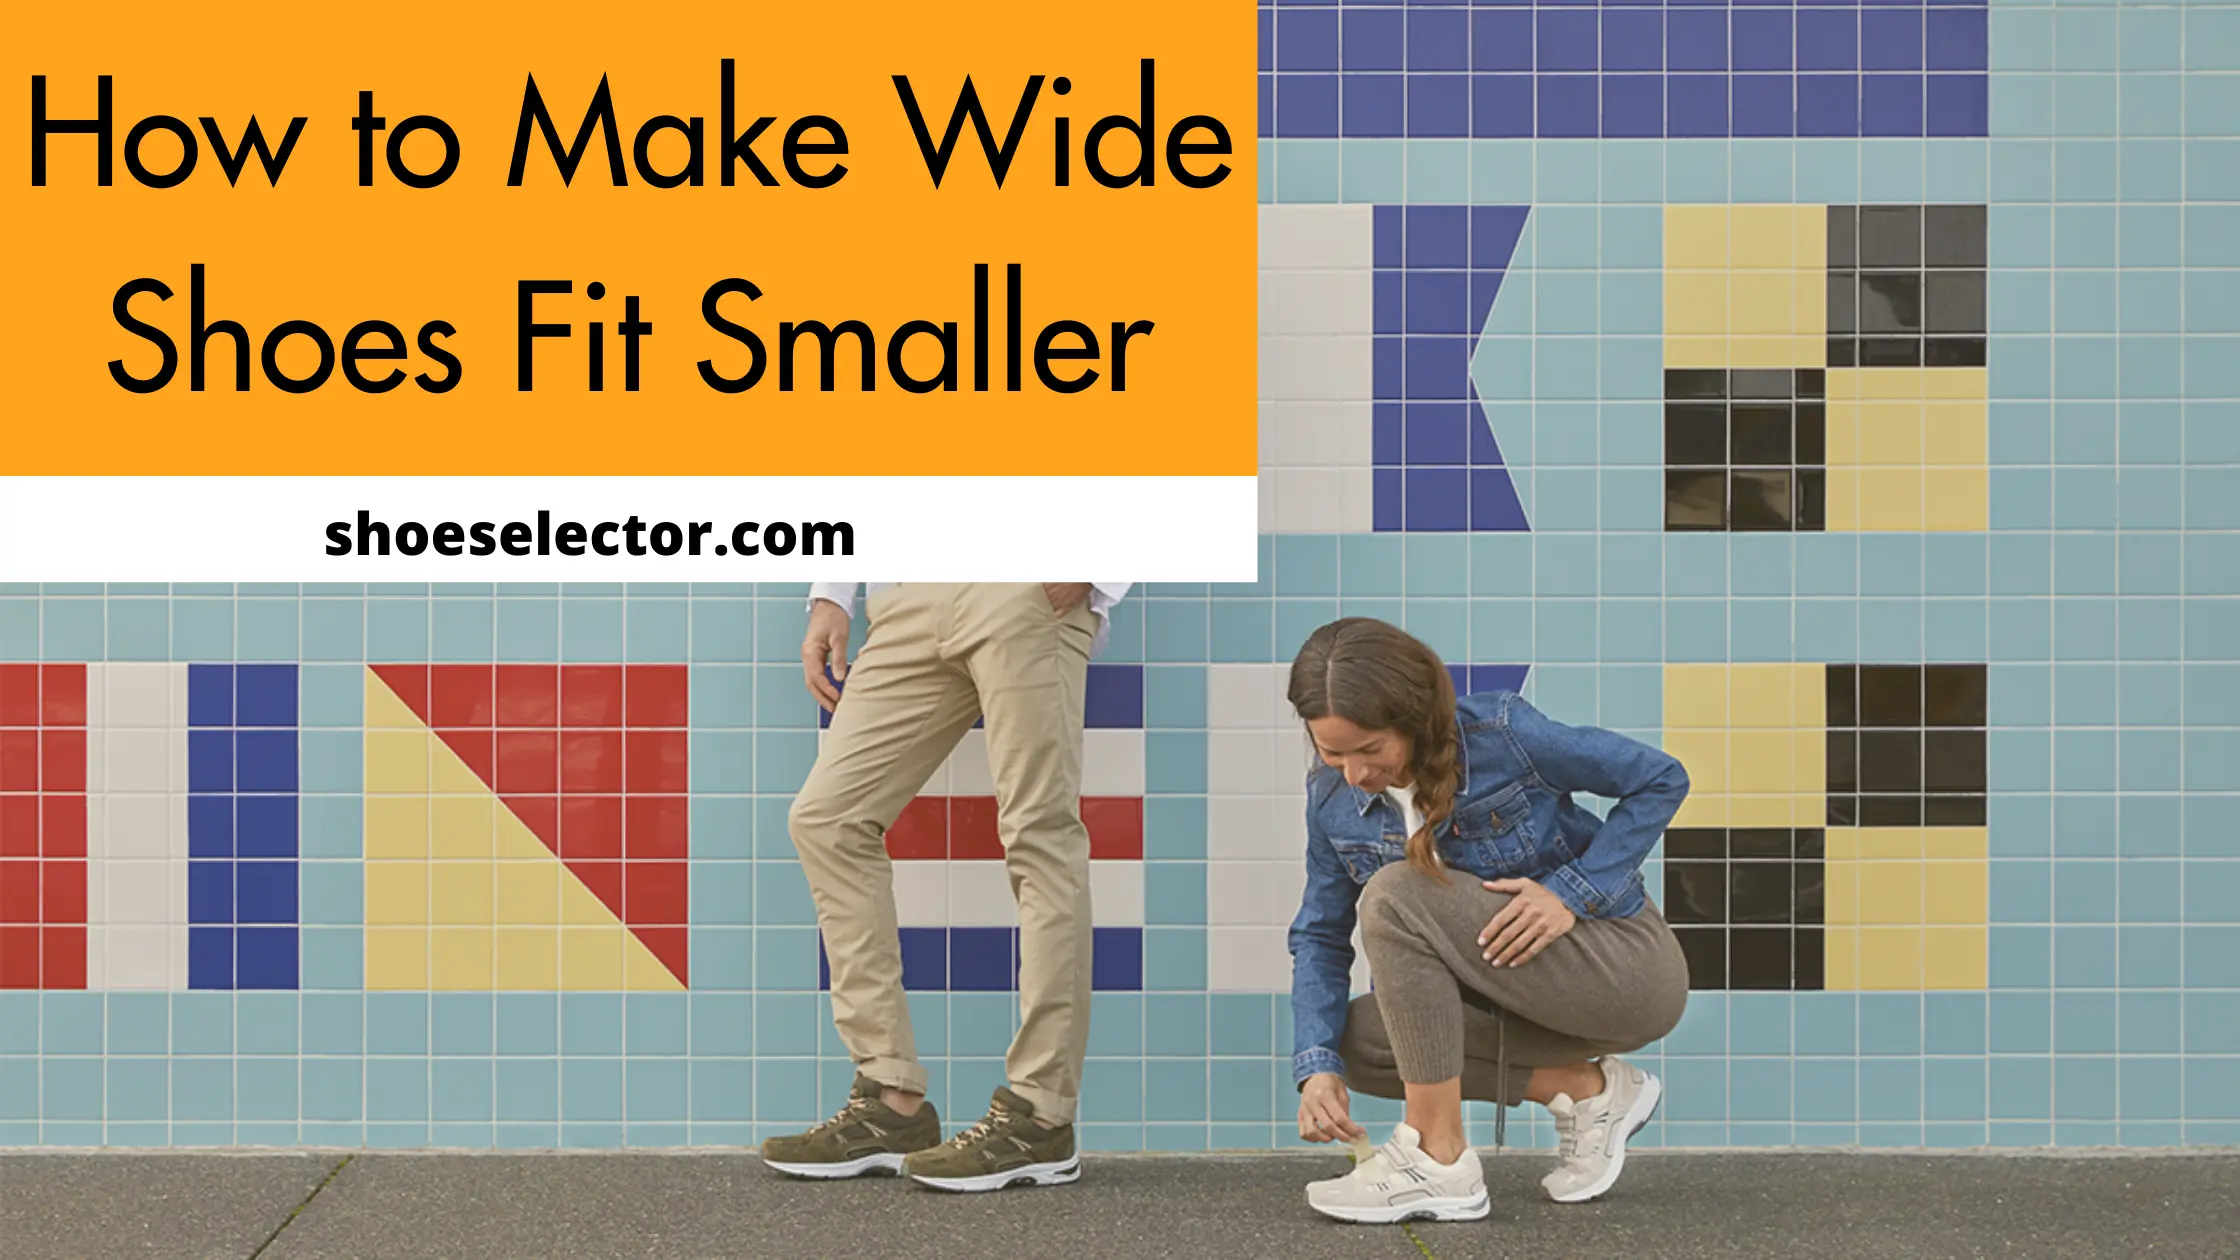 How To Make Wide Shoes Fit Smaller? - Latest Guide